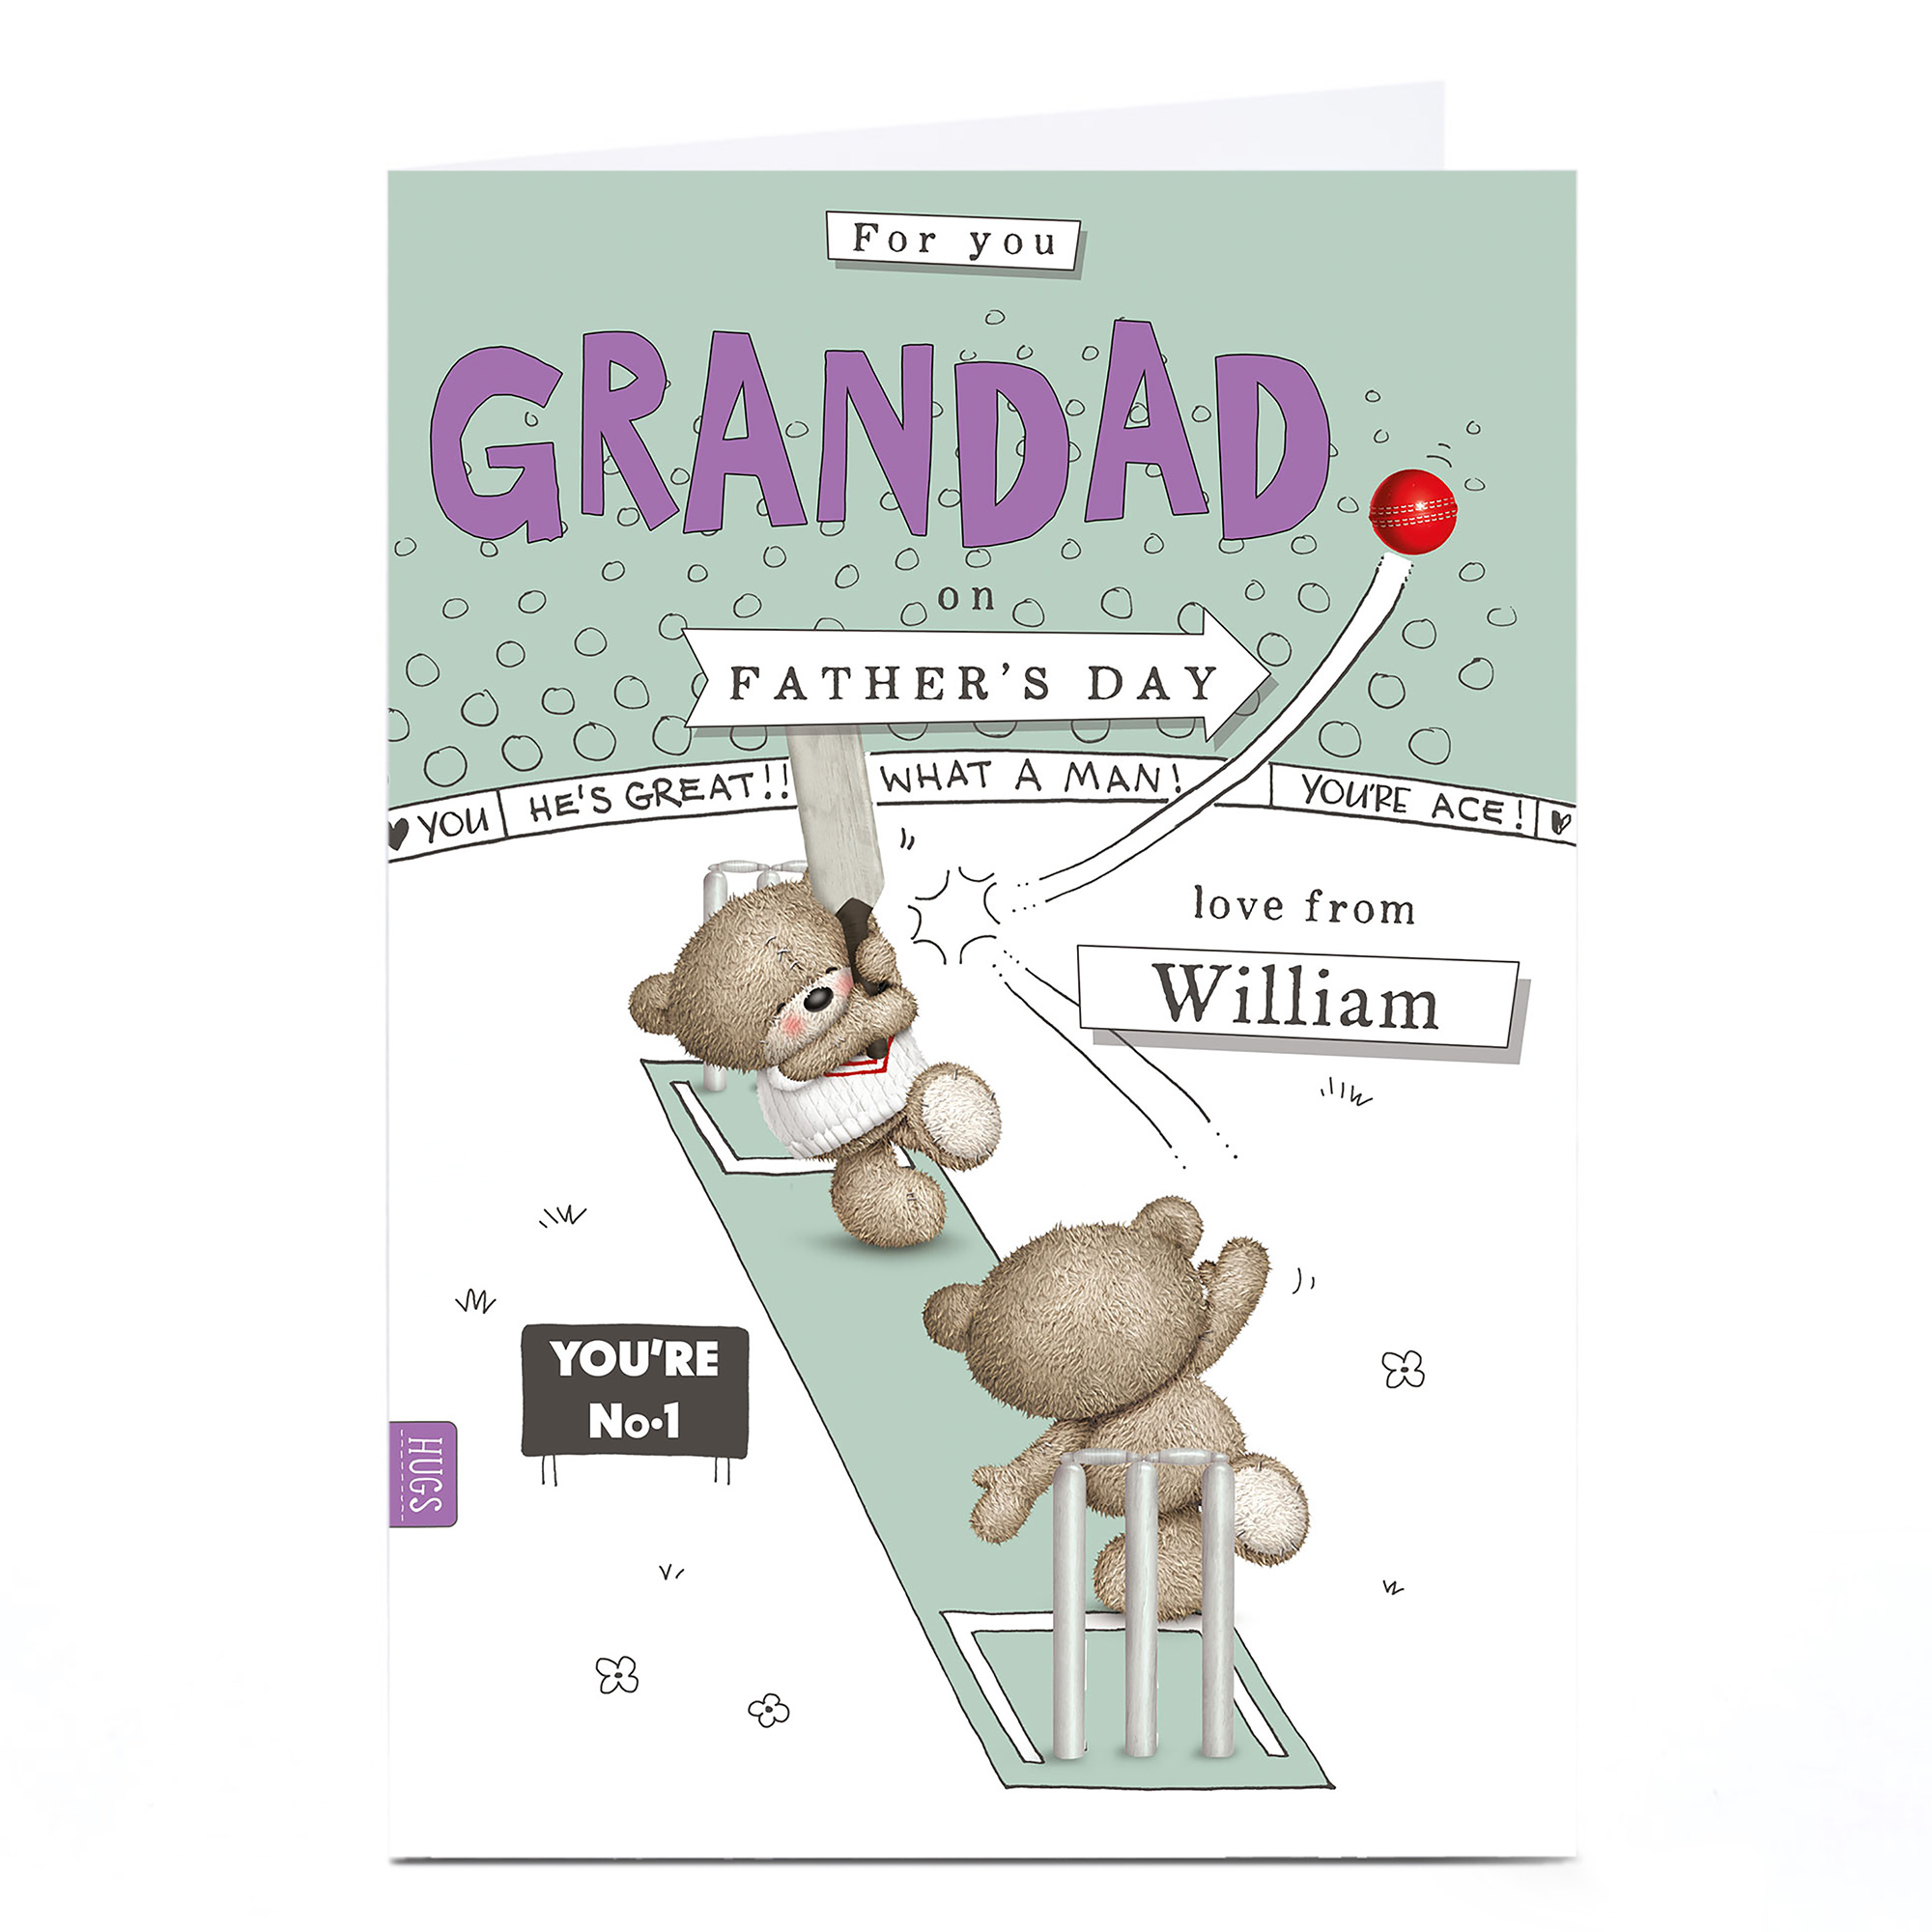 Hugs Personalised Father's Day Card - Cricket Bears Grandad